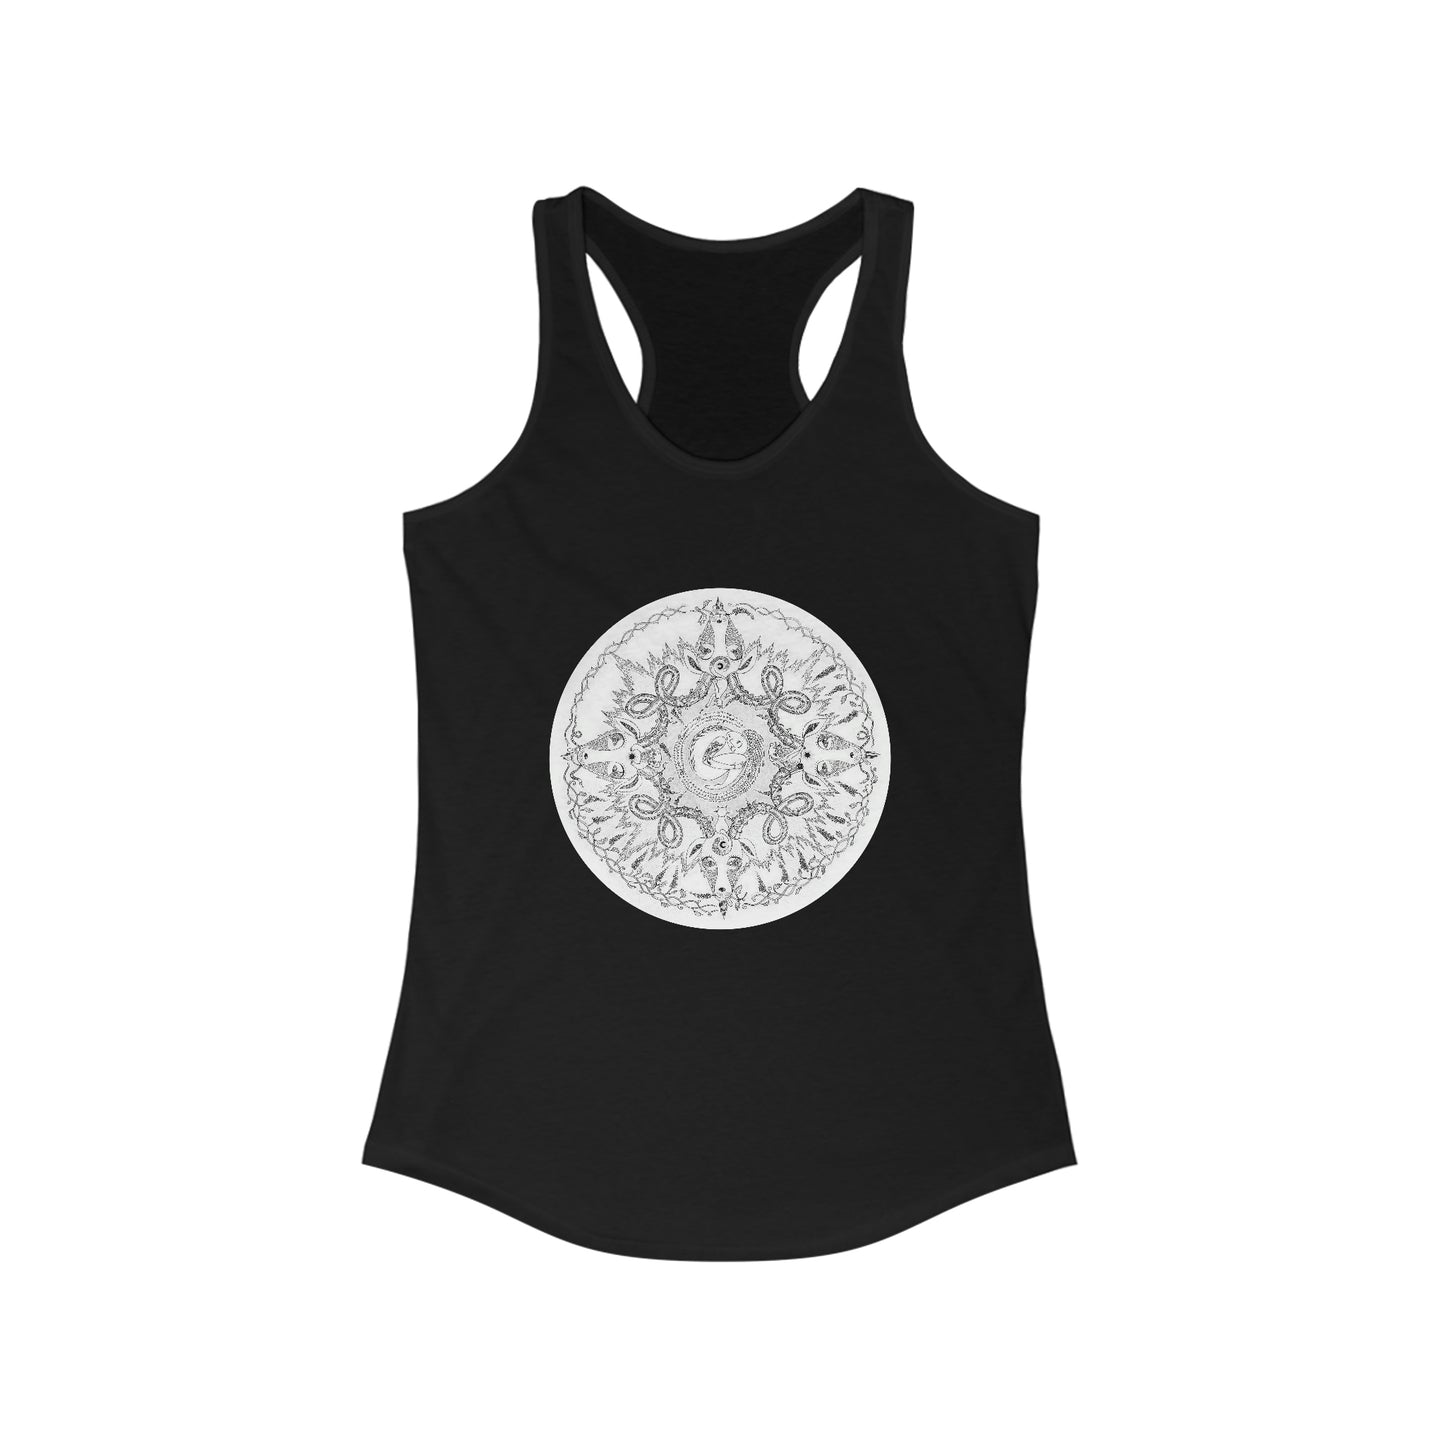 Chinese Zodiac Sign Tank Top (Goat) Limited Edition